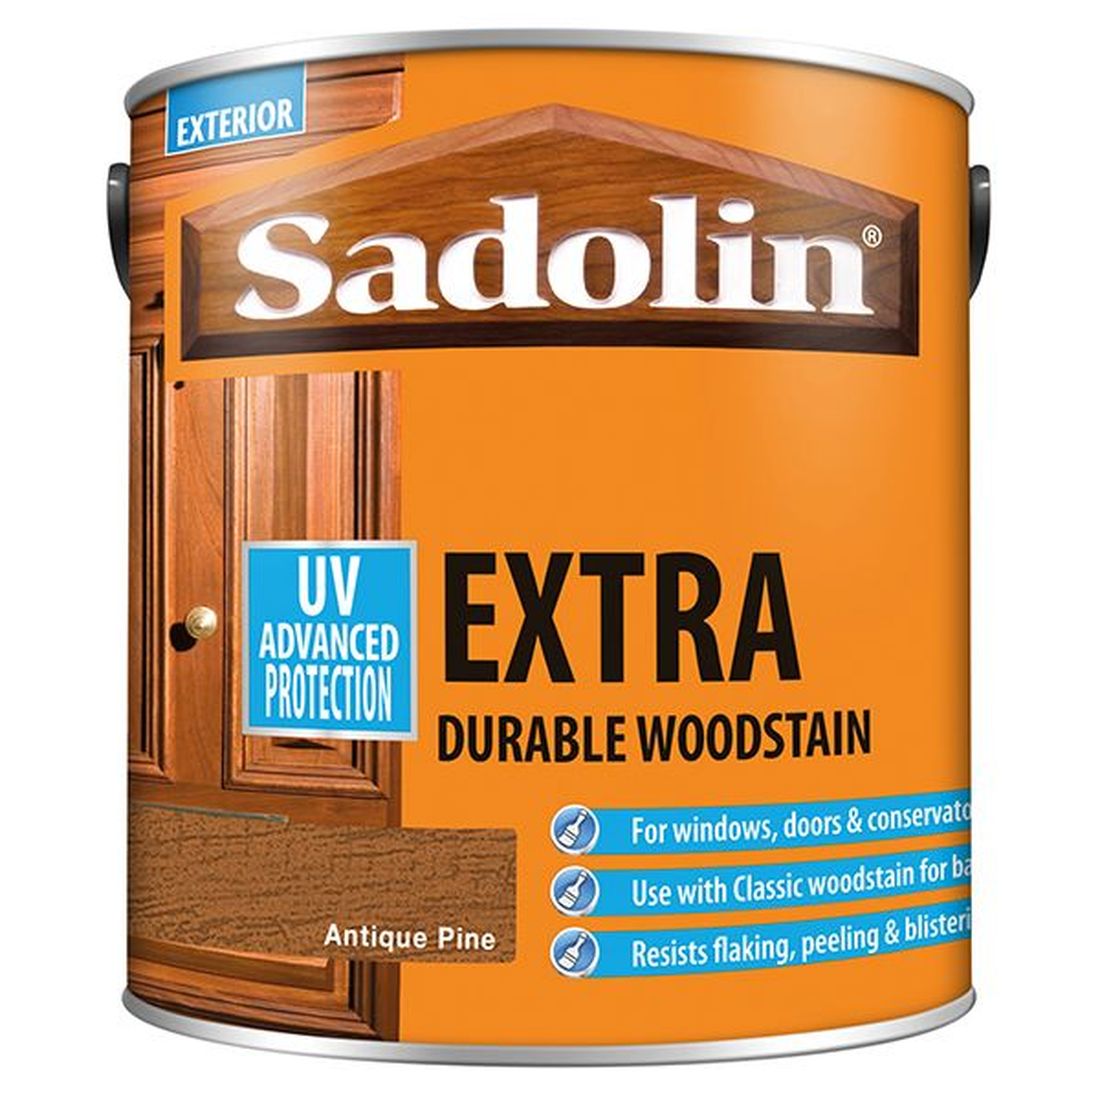 Sadolin Extra Durable Woodstain Antique Pine 2.5 litre                                  